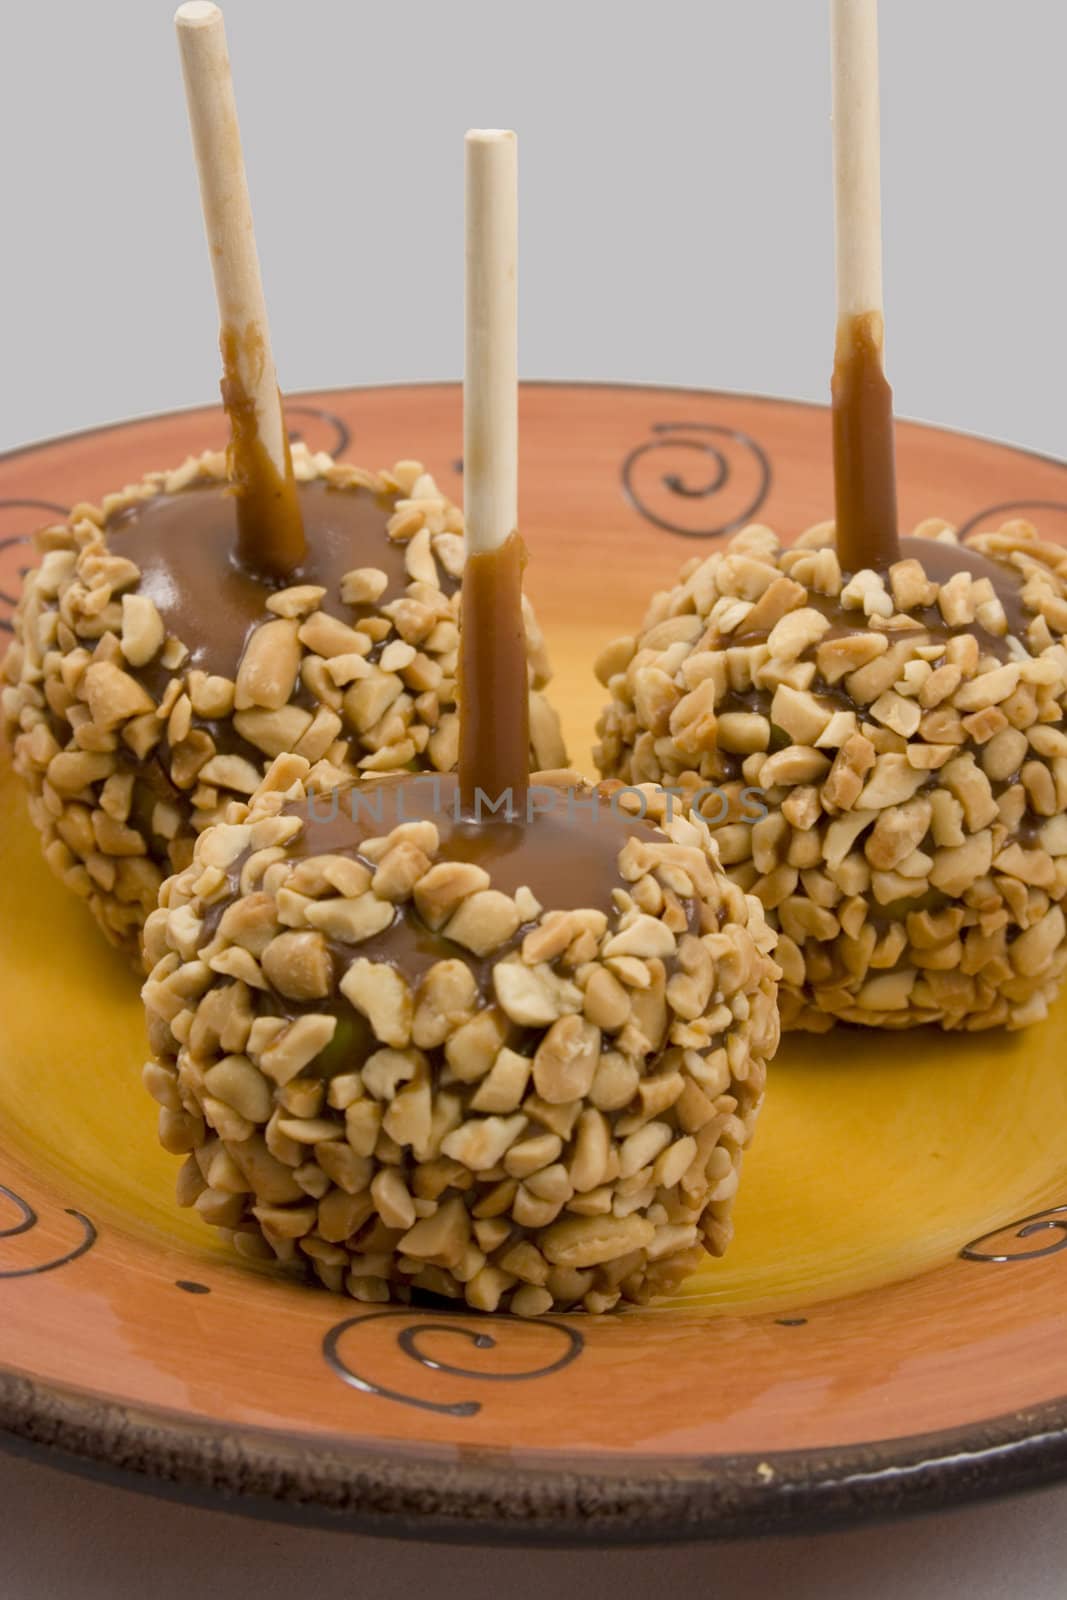 Carmel apples with nuts on a plate just in time for the holidays